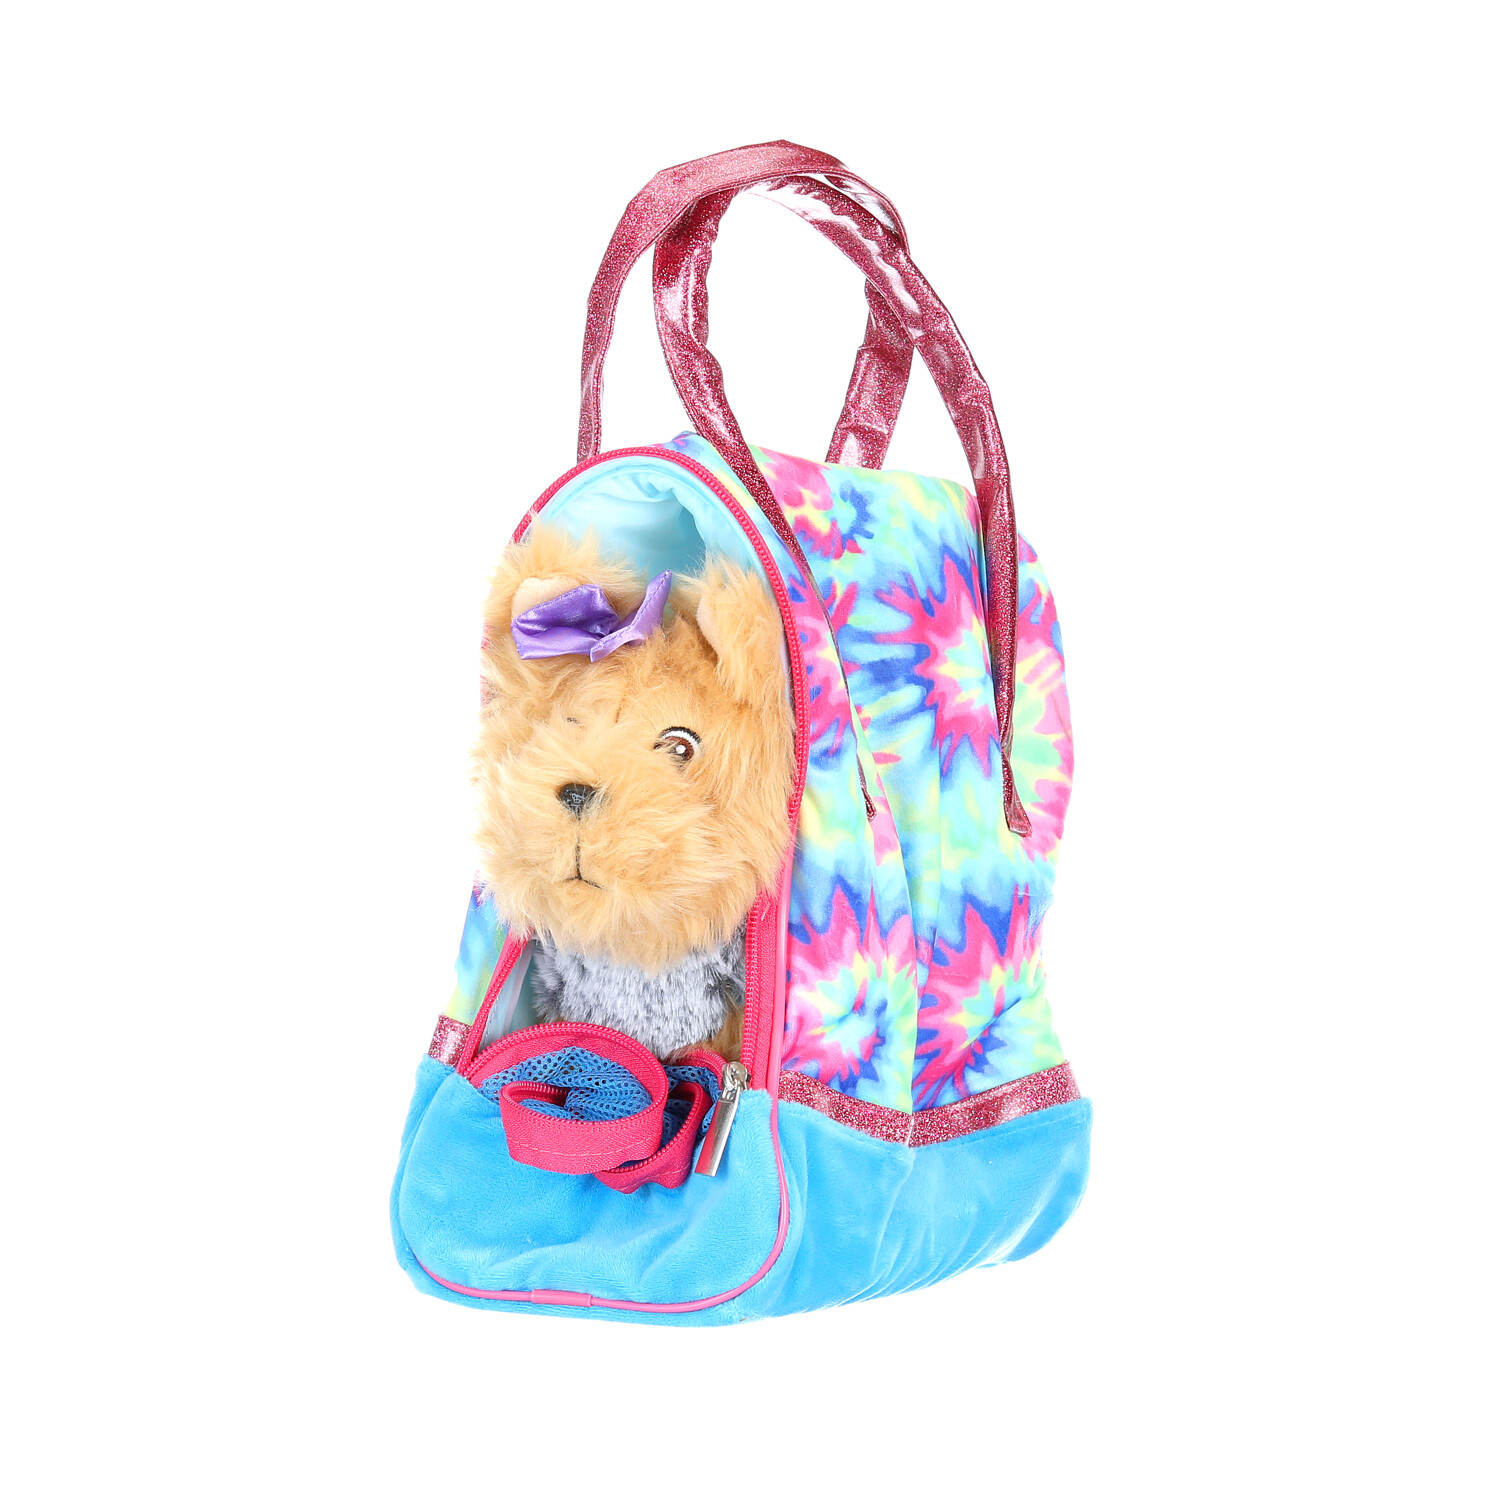 Pin by Barbara G. on For pets  Dog carrier bag, Puppy accessories